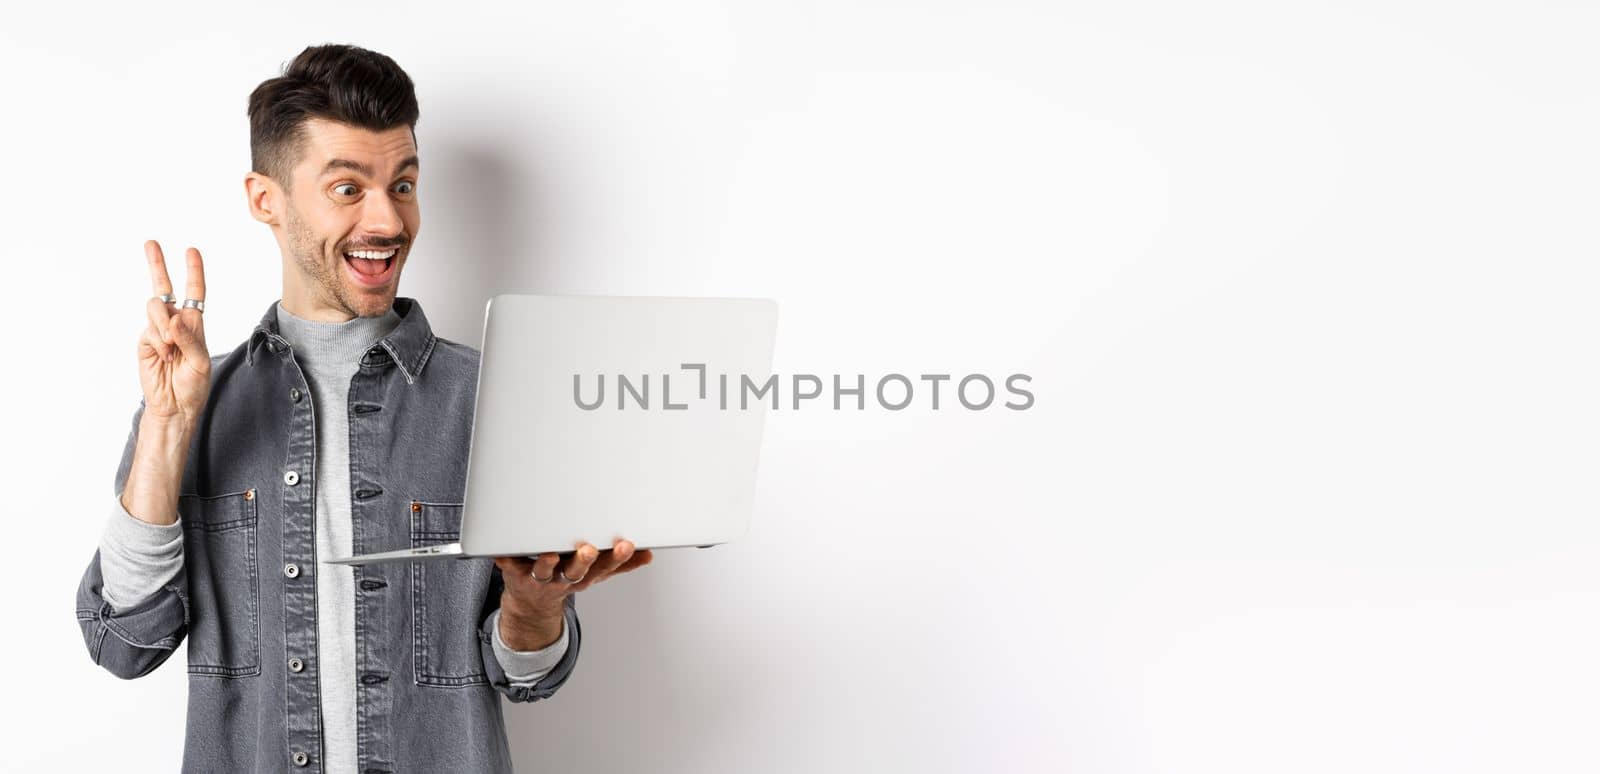 Funny young man video chat on laptop, showing v-sign and smiling at computer camera, standing against white background.